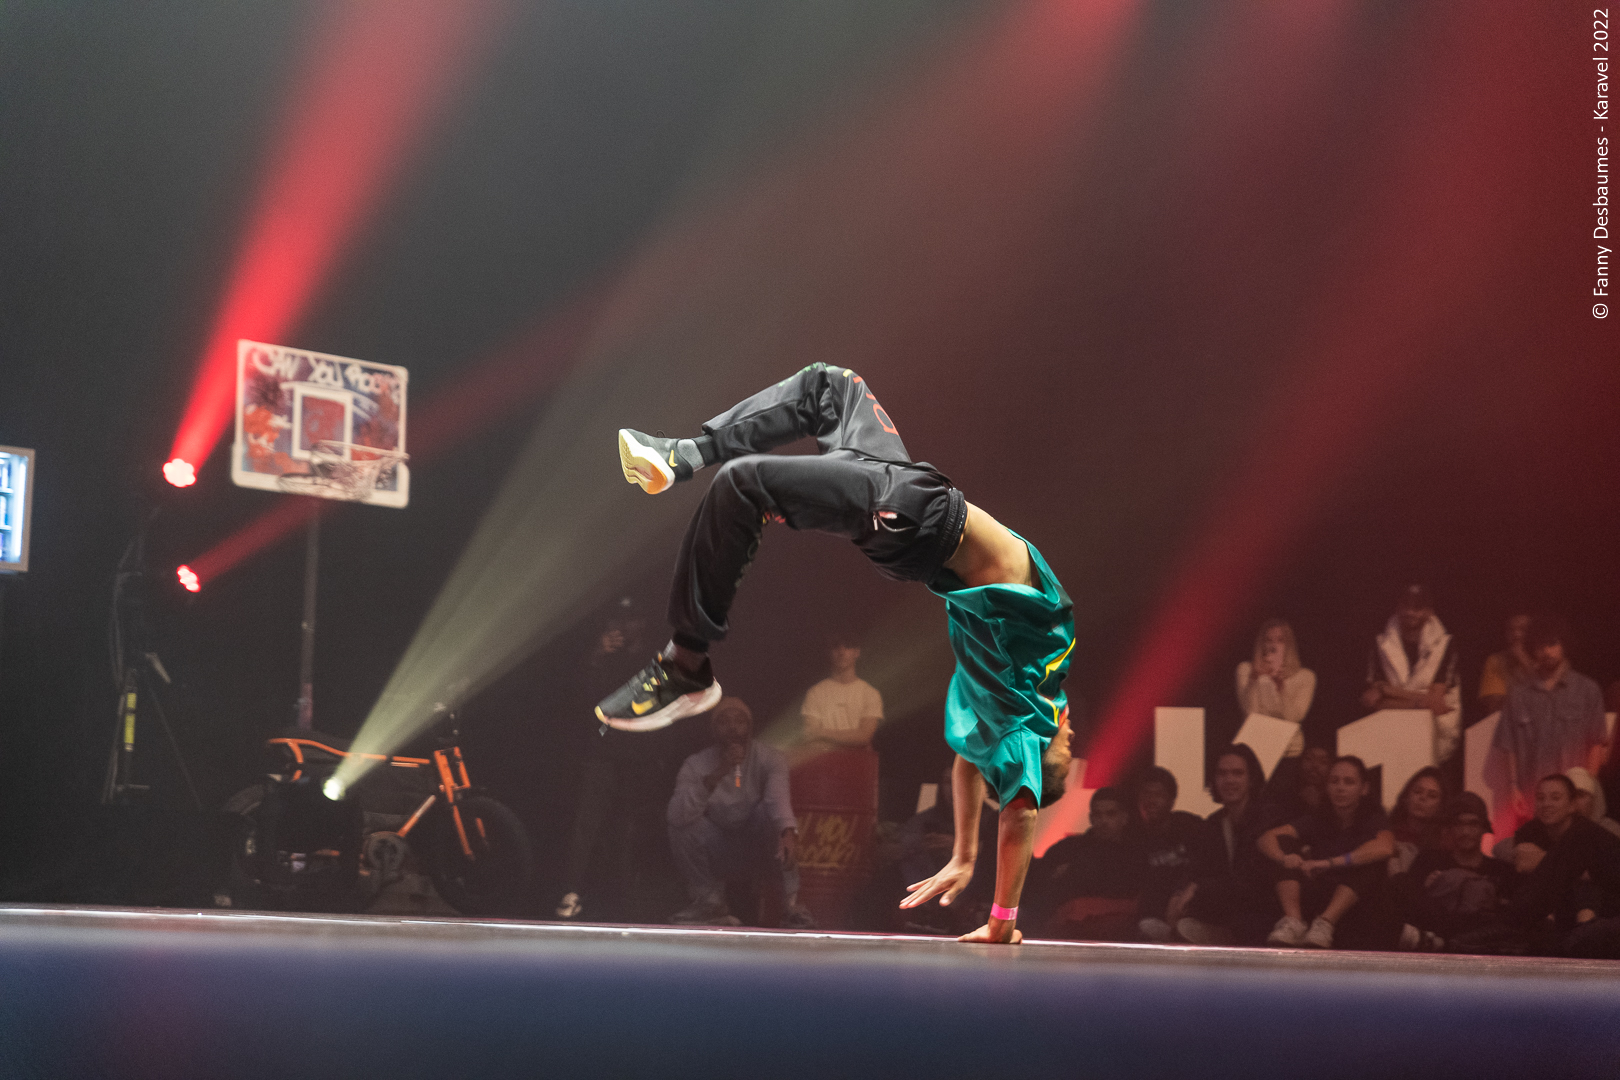 Photo de CAN YOU ROCK - Battle All Style - Collectif Street Off